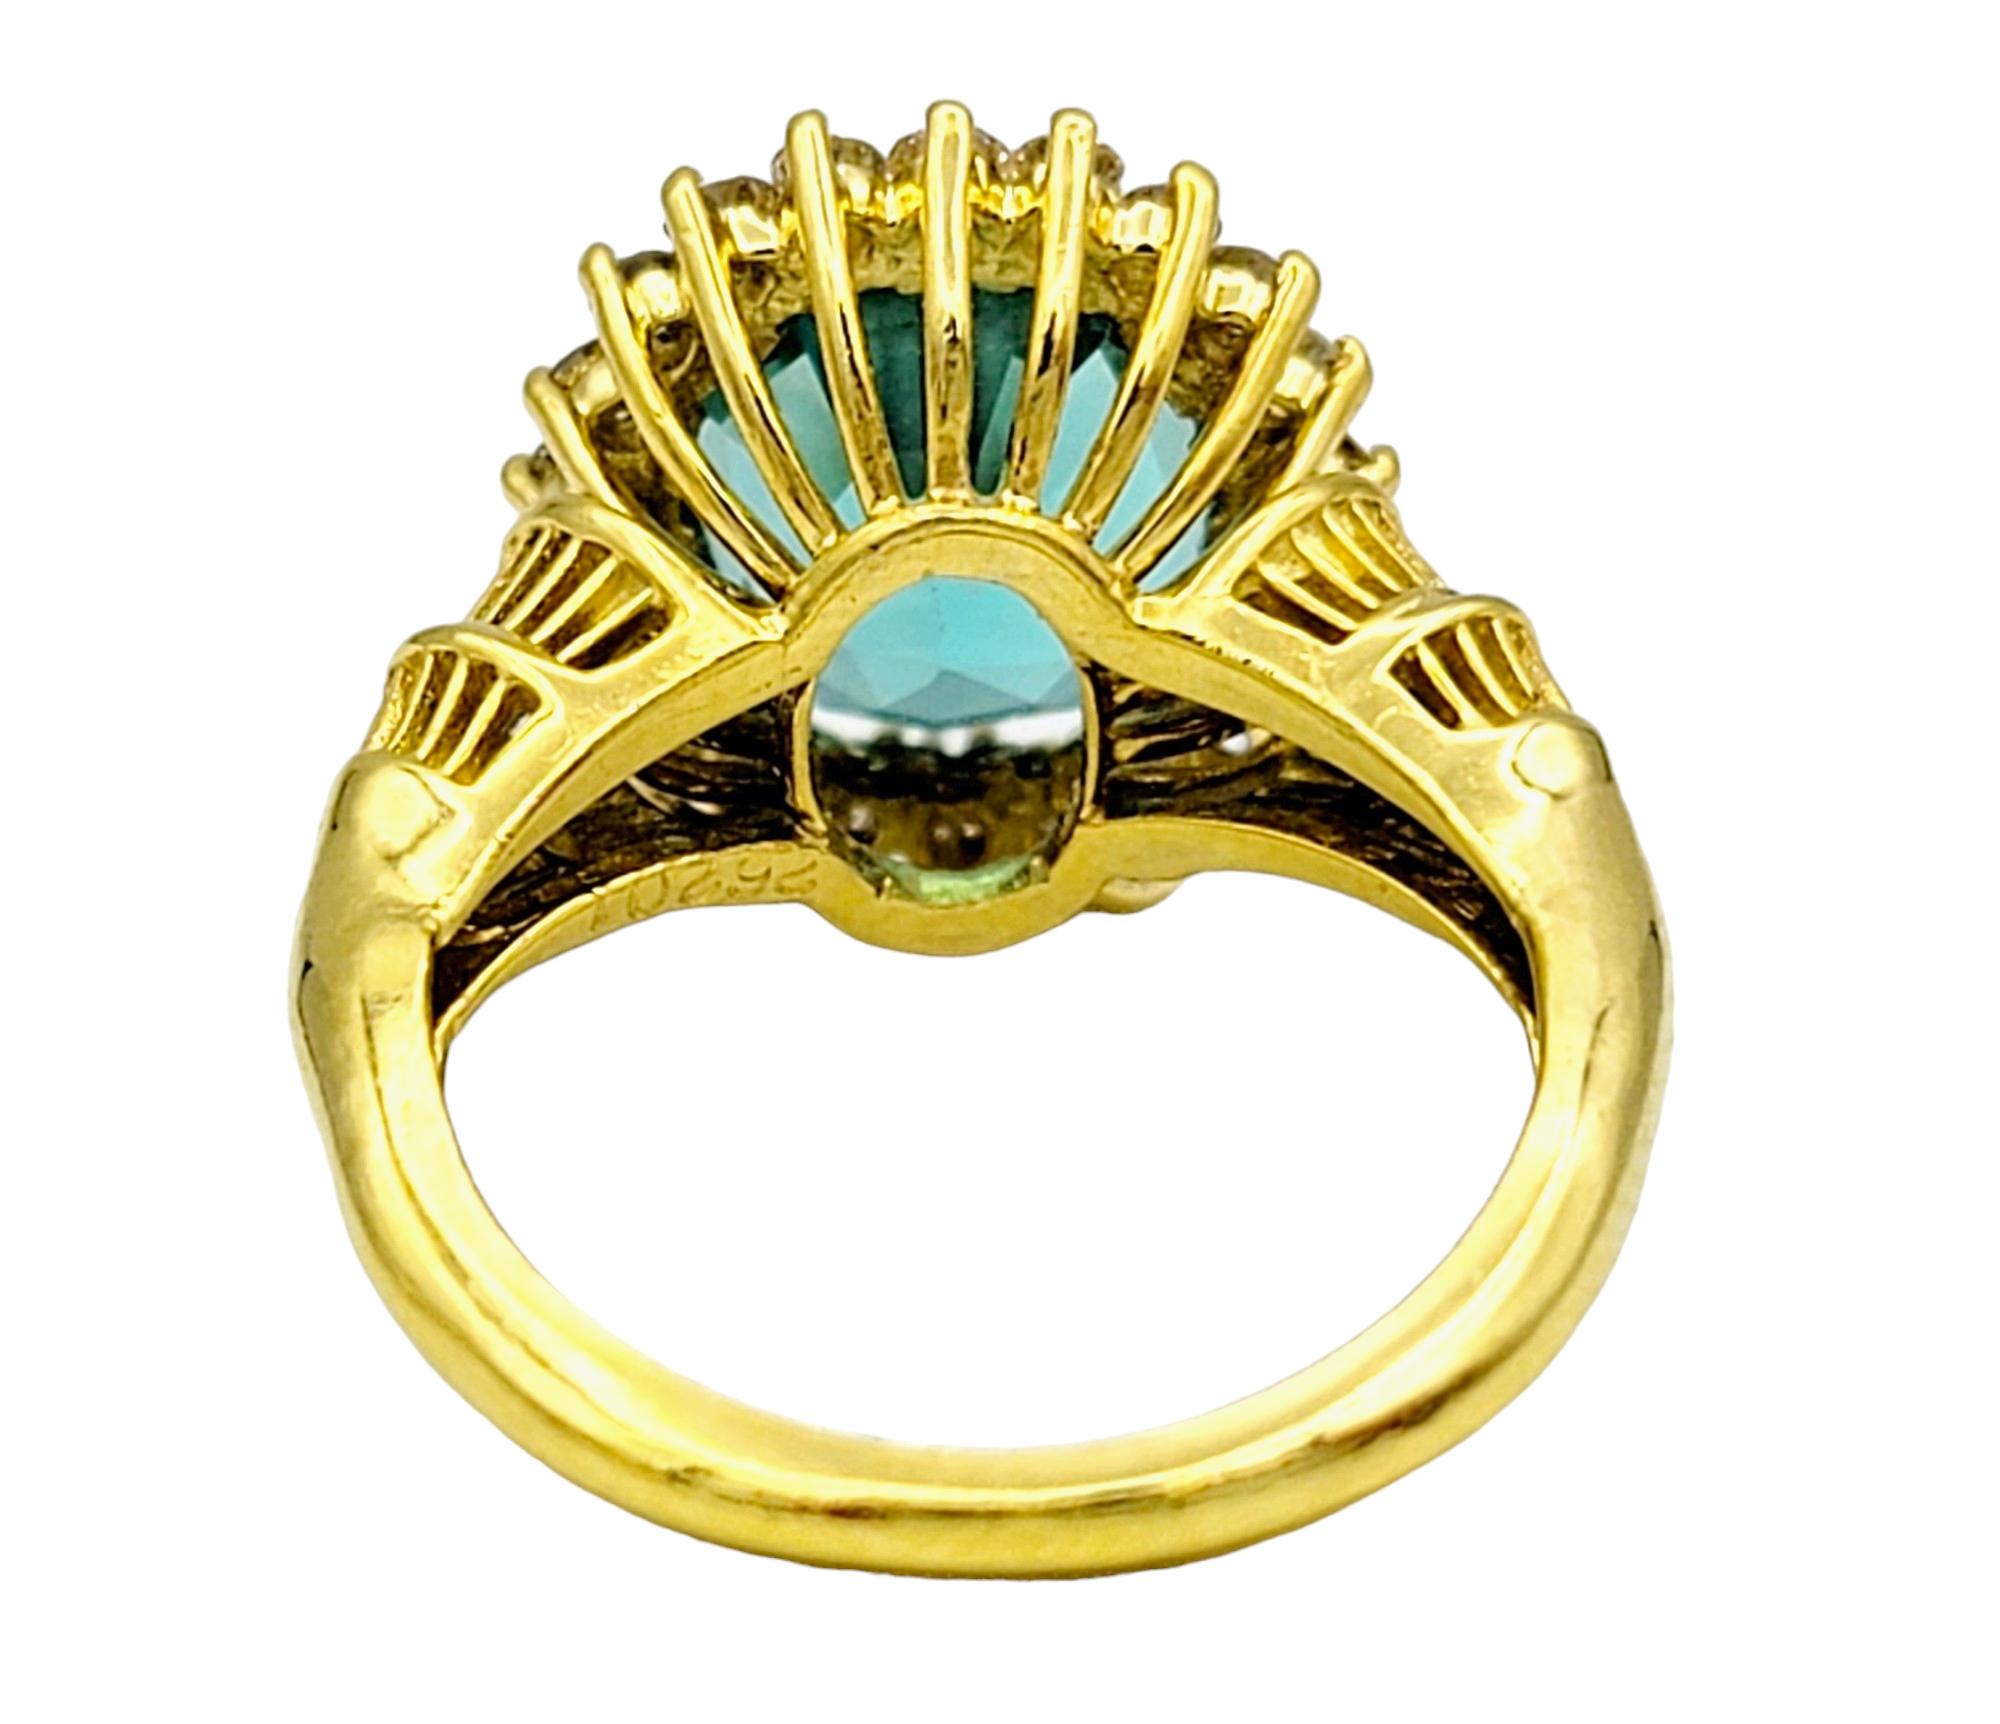 Rare 3.0 Carat Oval Cut Indicolite Tourmaline Ring with Diamond Halo in 18K Gold For Sale 1